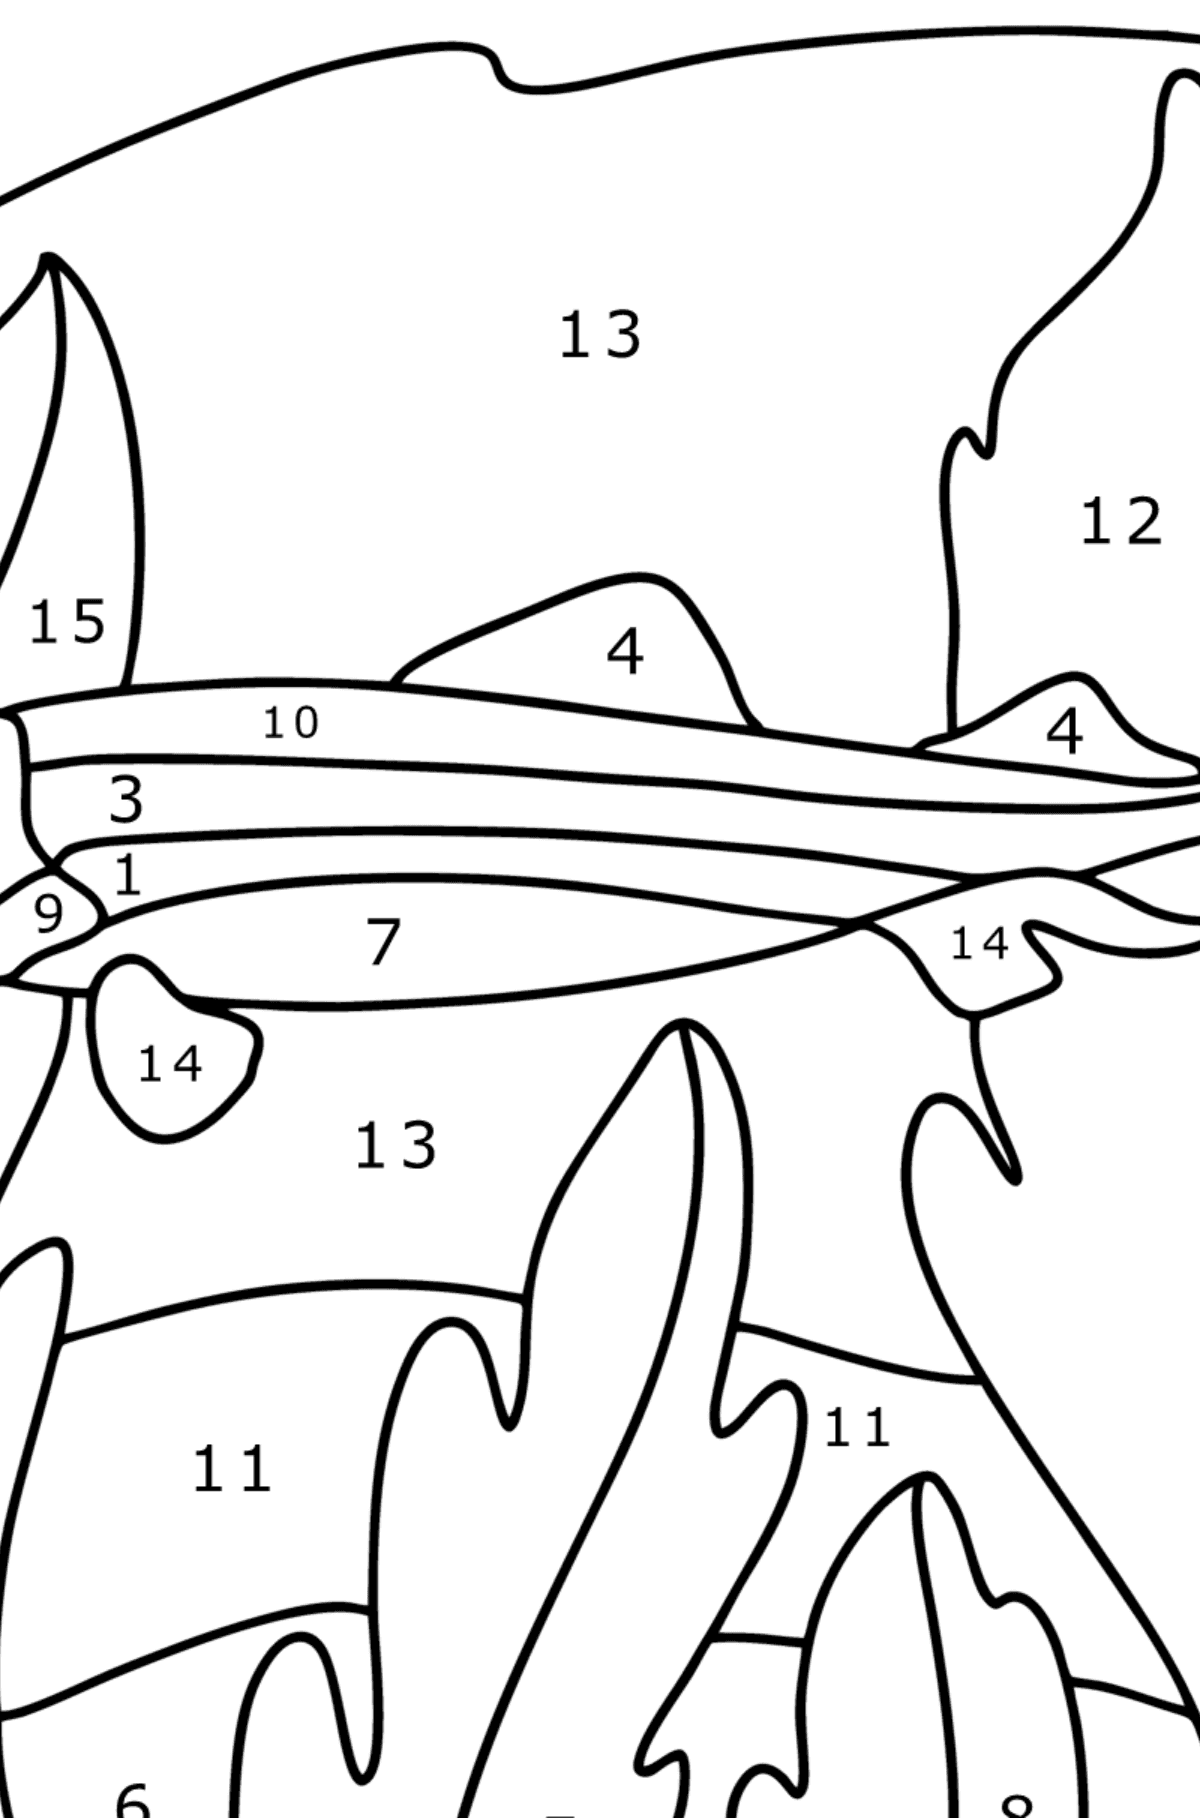 Crocodile Shark coloring page - Coloring by Numbers for Kids